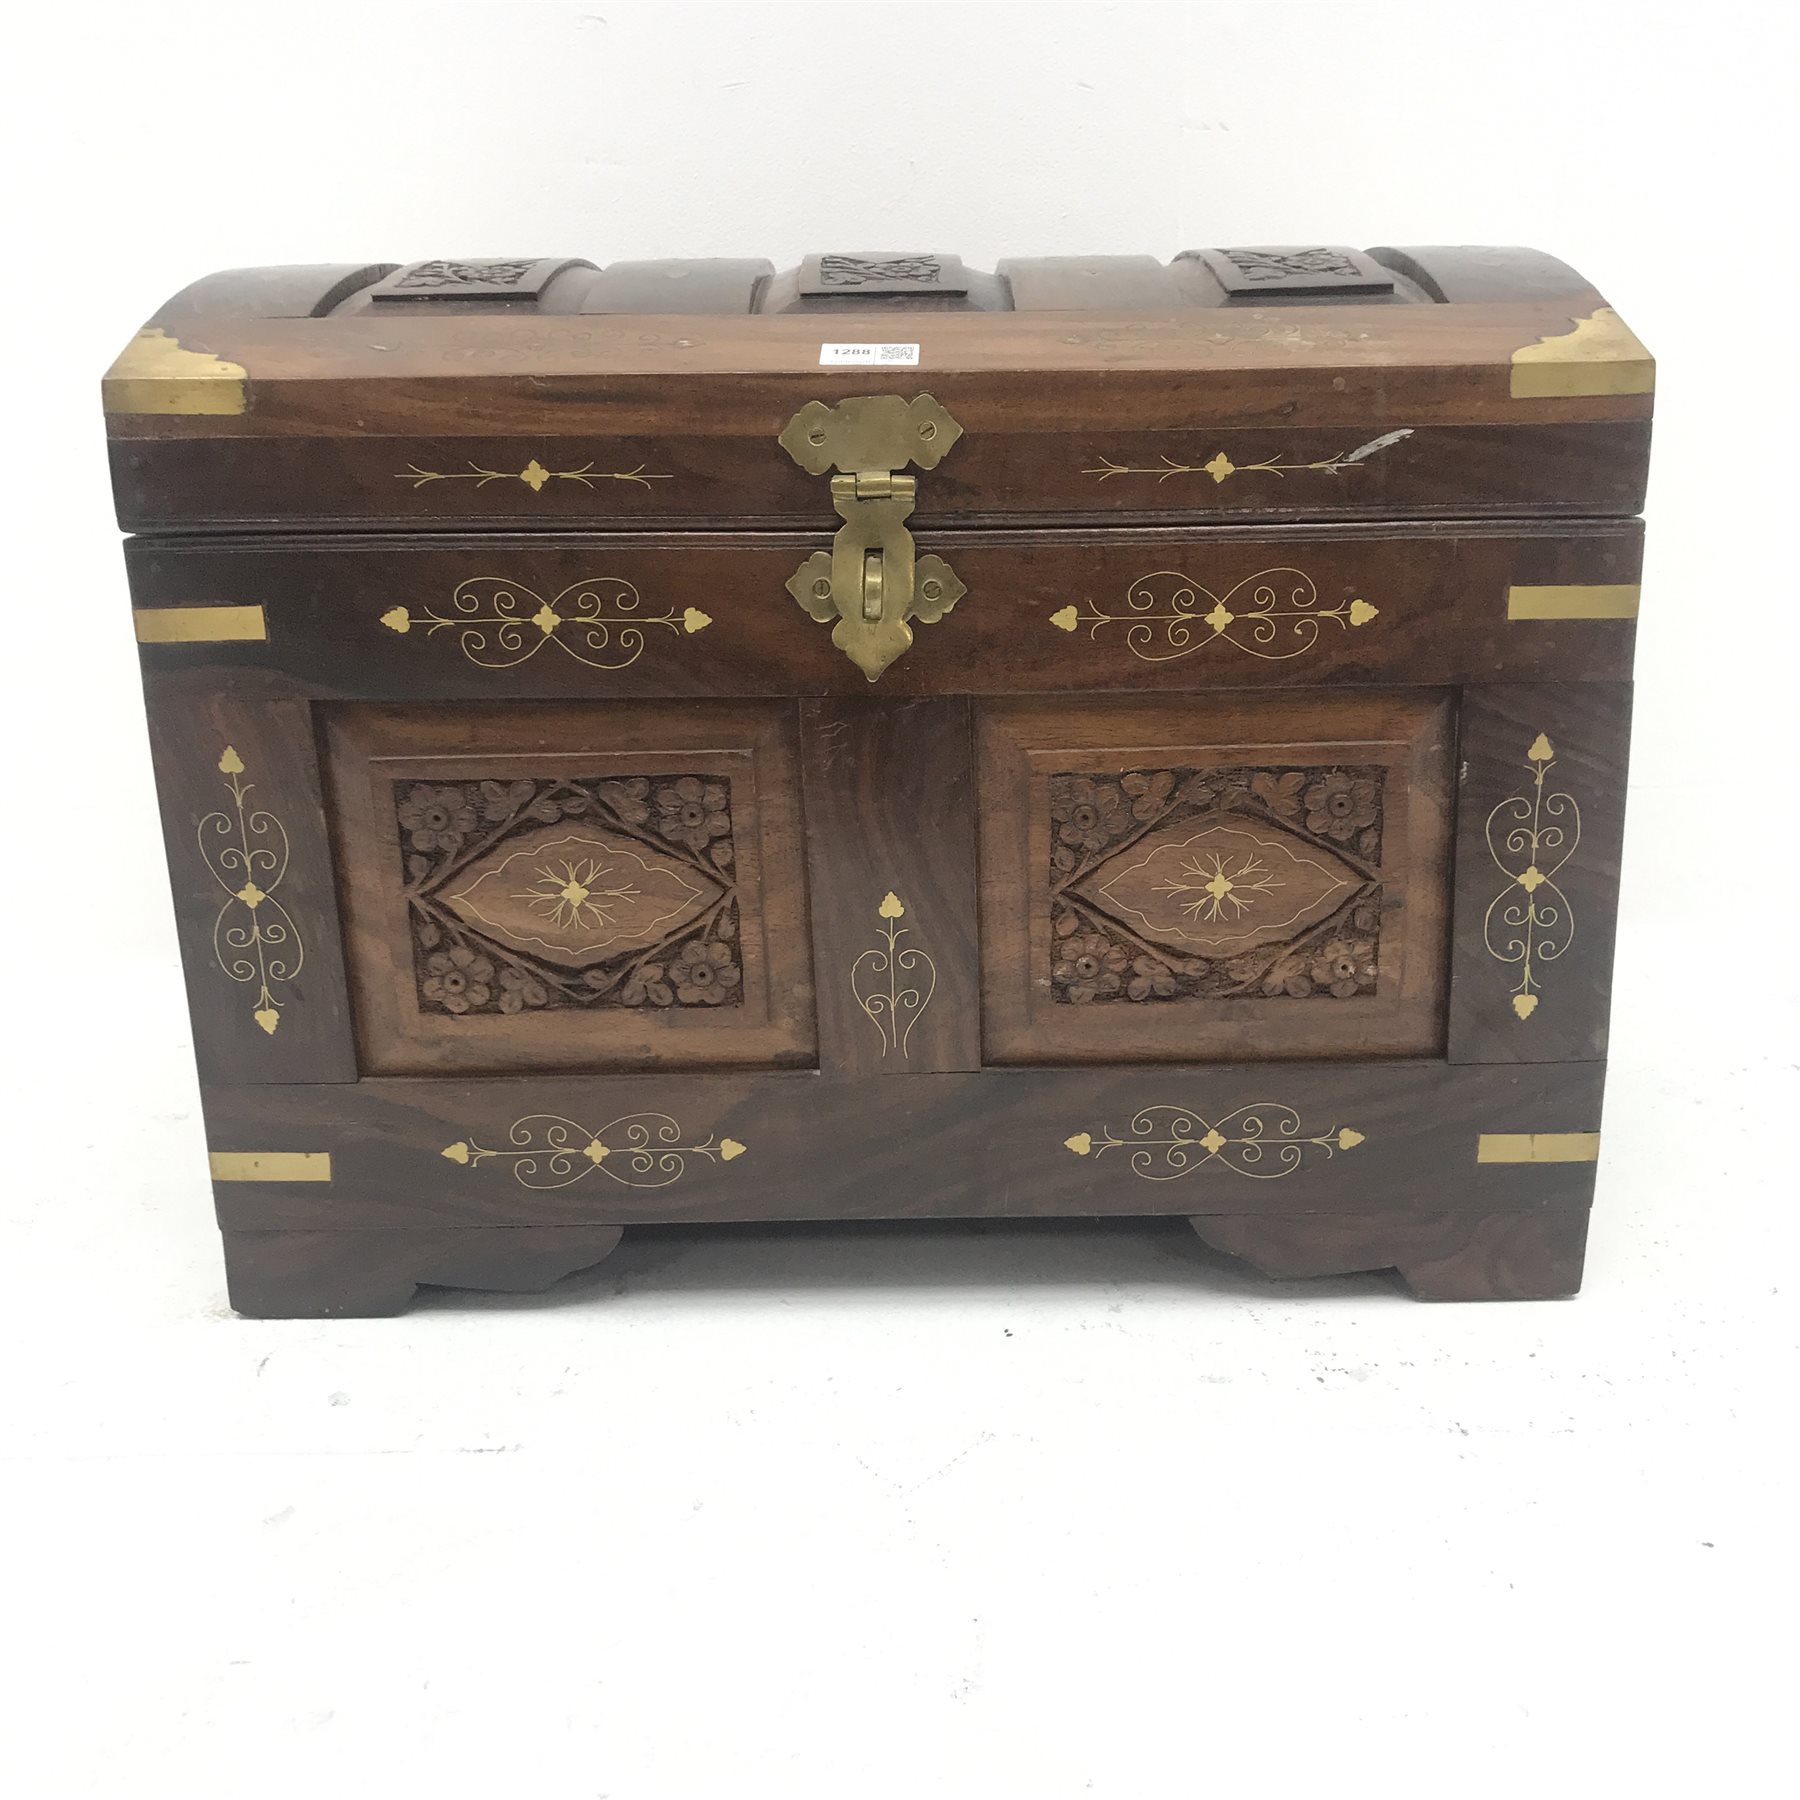 Eastern brass inlaid hardwood dome top trunk, hinged lid, W60cm, H45cm, D38cm - Image 3 of 8